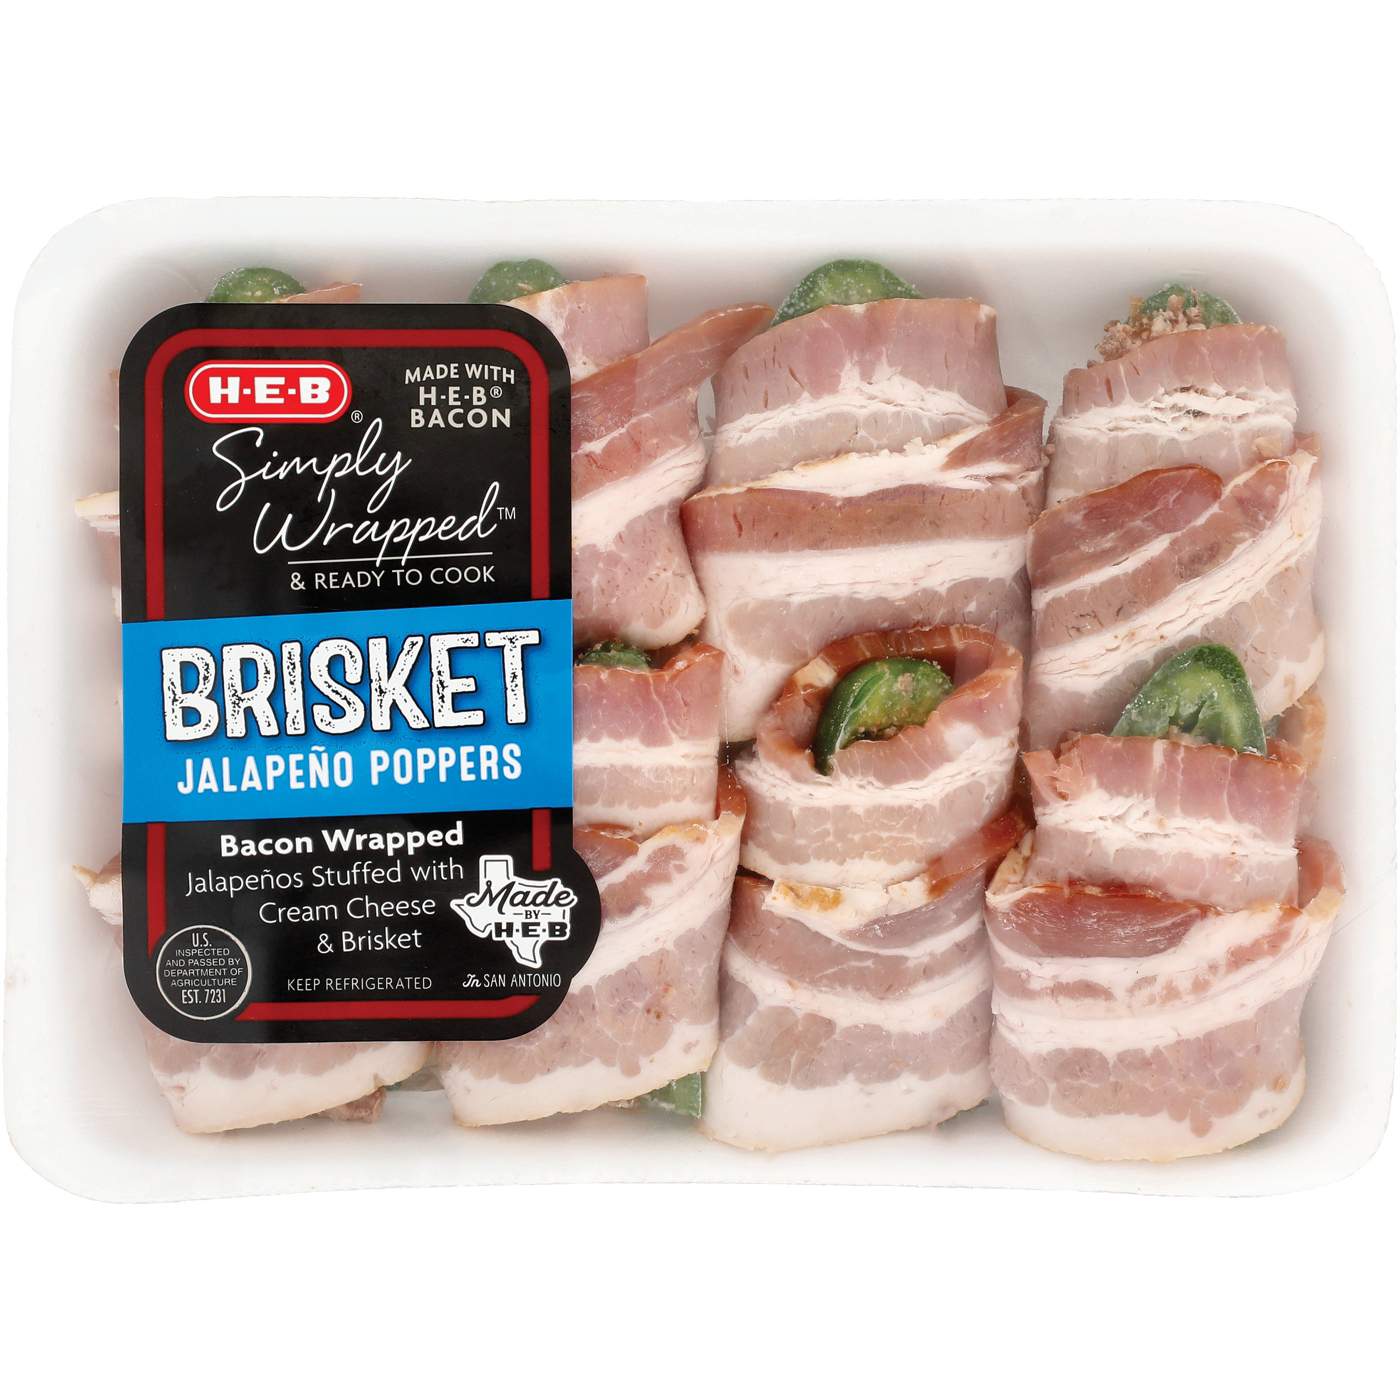 H-E-B Simply Wrapped Brisket Jalapeno Poppers; image 1 of 2